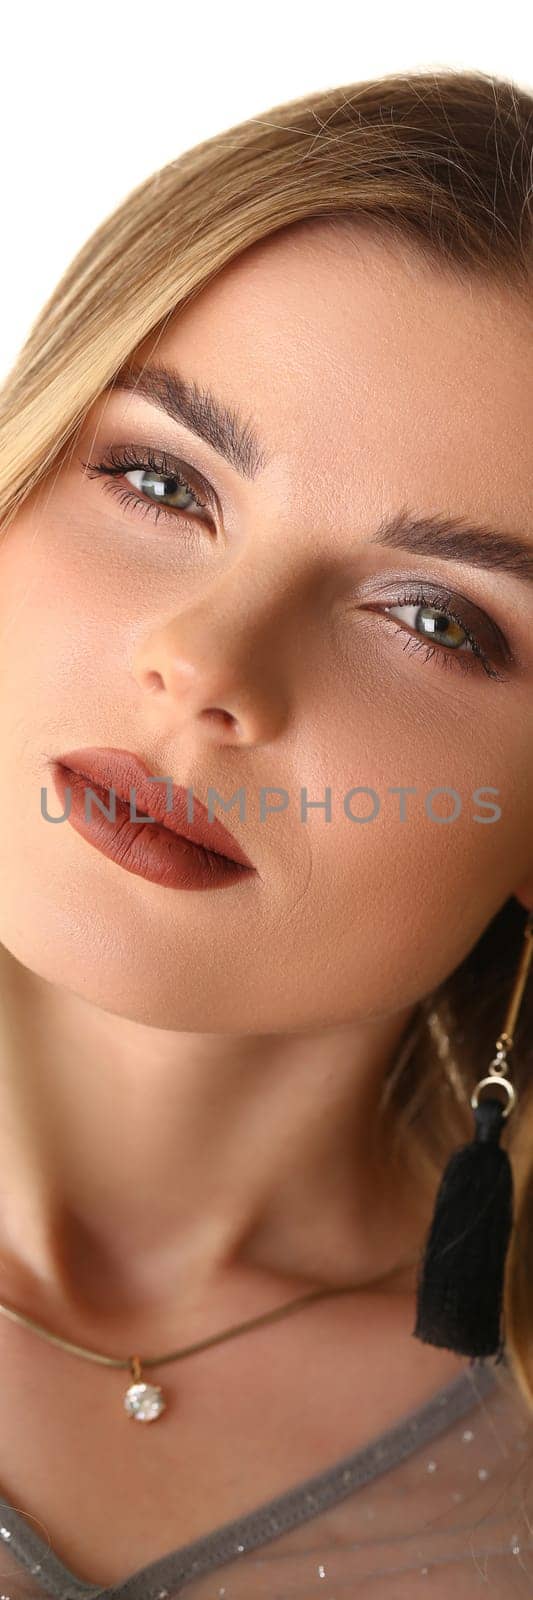 Portrait of a young beautiful woman with evening makeup with pigtails by kuprevich